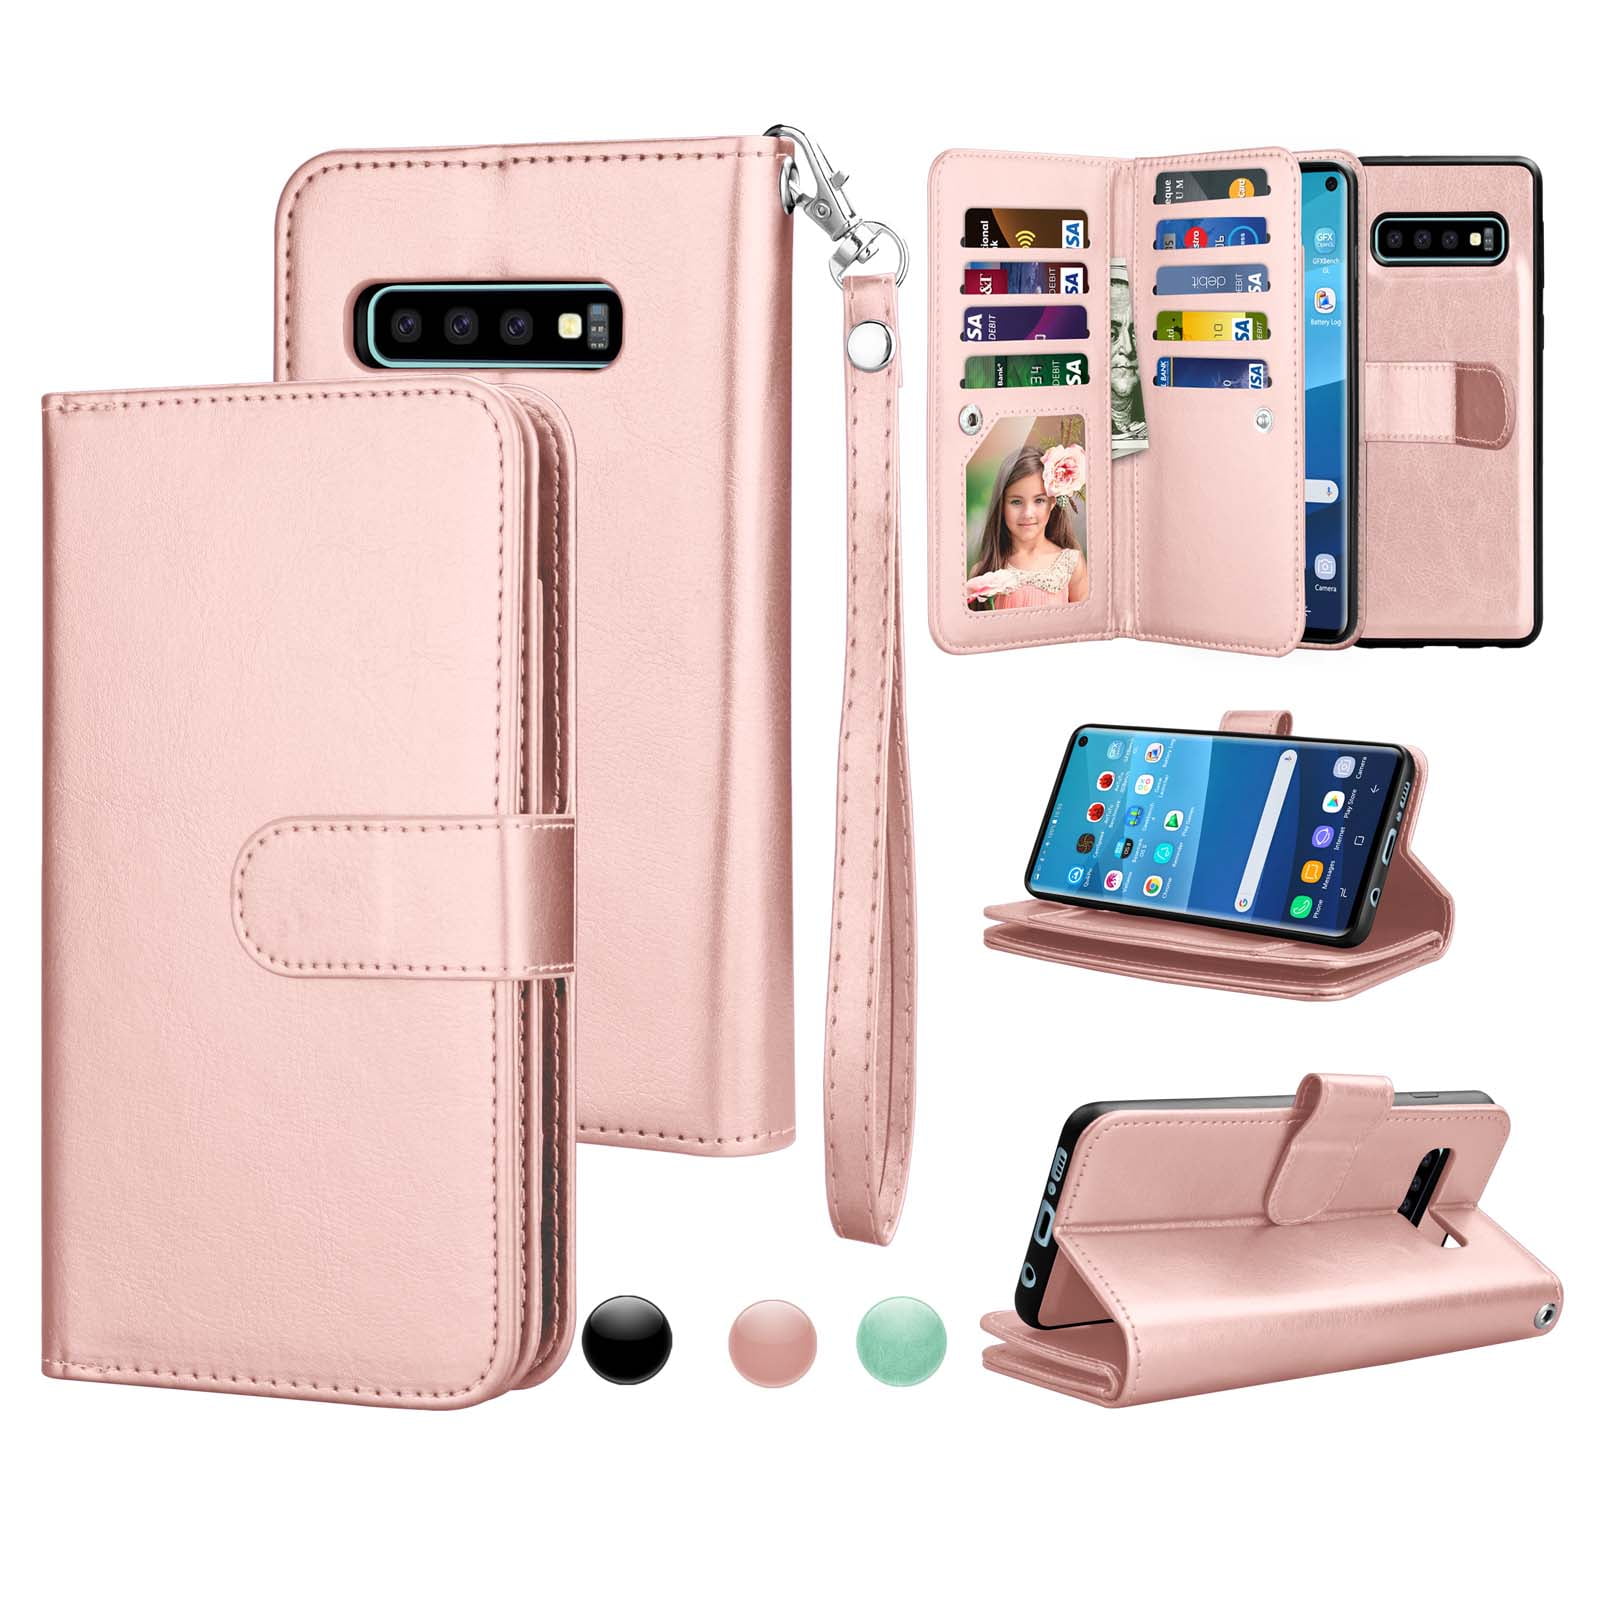 flower2 Leather Cover Wallet for Samsung Galaxy S10 Simple Flip Case Fit for Samsung Galaxy S10 